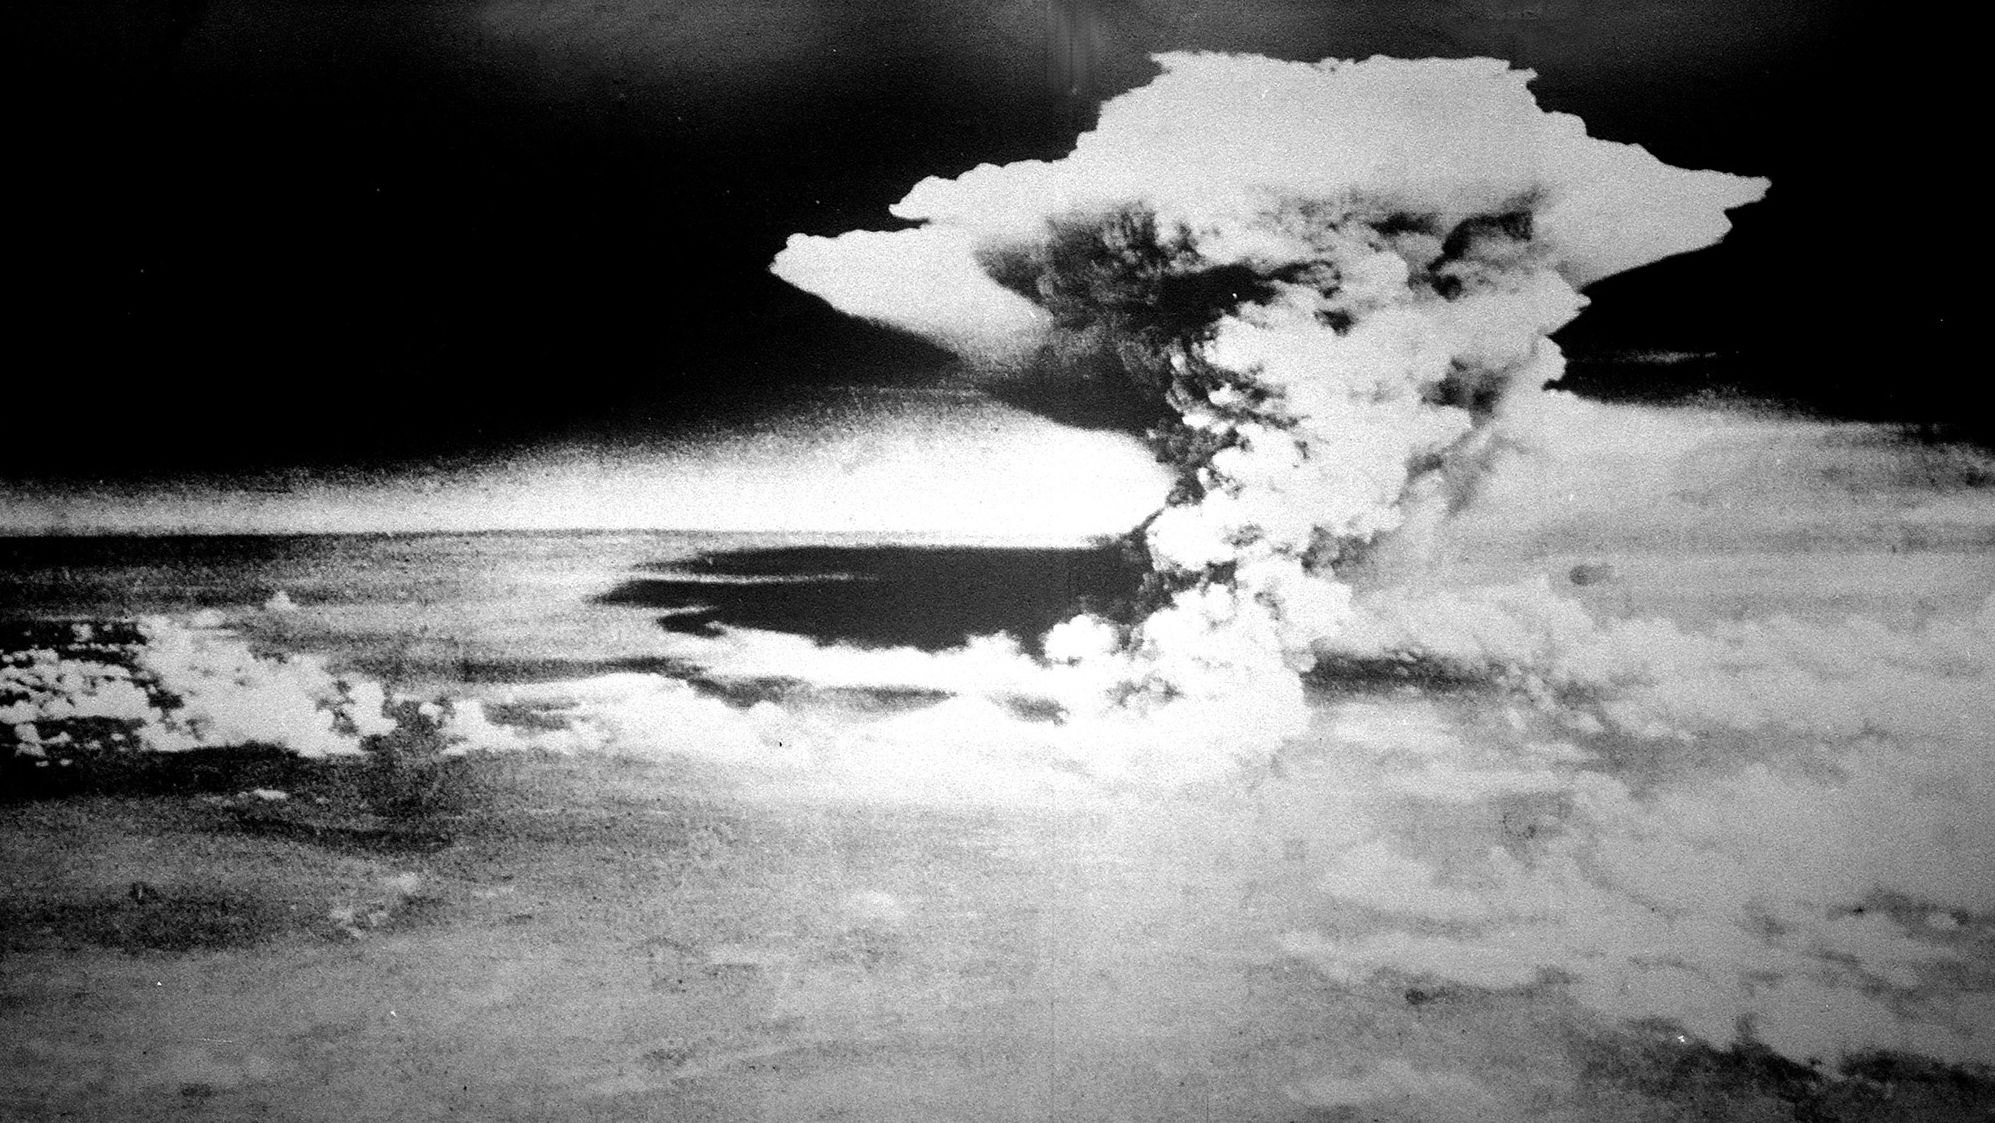 The decision by the United States to use the atomic bomb against Japan in August 1945 was credited with ending World War II. Hundreds of thousands in Hiroshima and Nagasaki were killed instantly or died from radiation in the aftermath of the bombings.